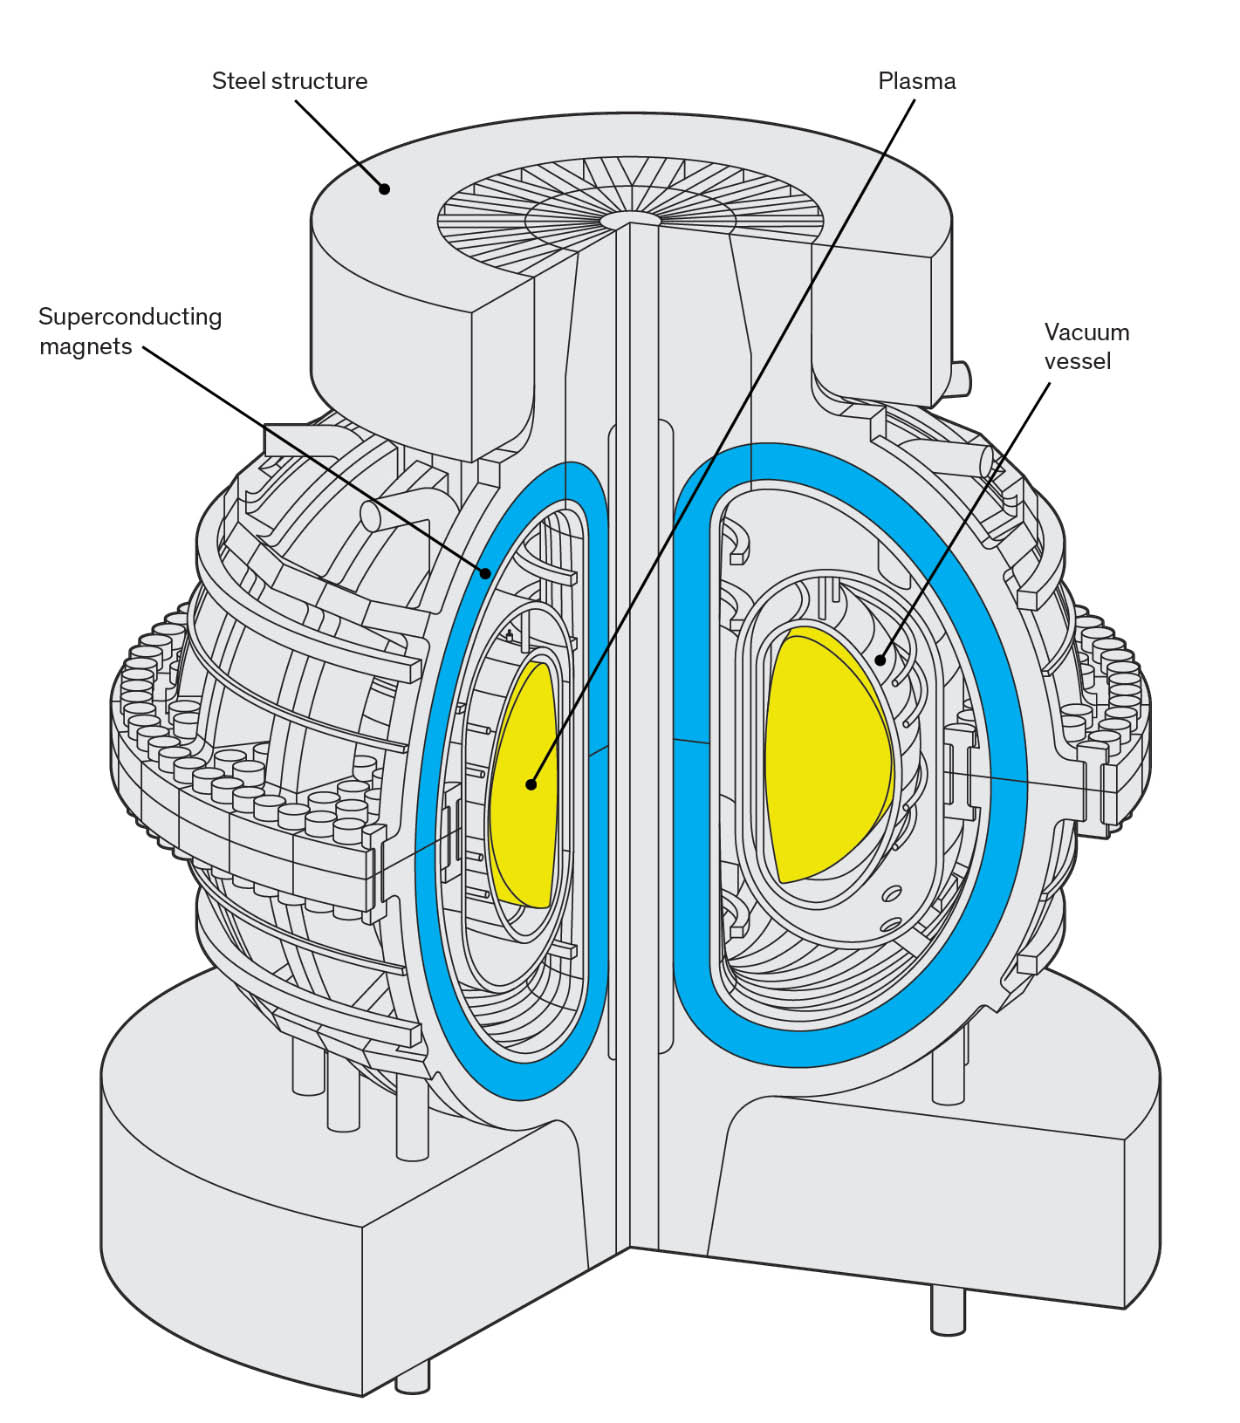 Nuclear Fusion: How Fast Does Plasma Rotate?